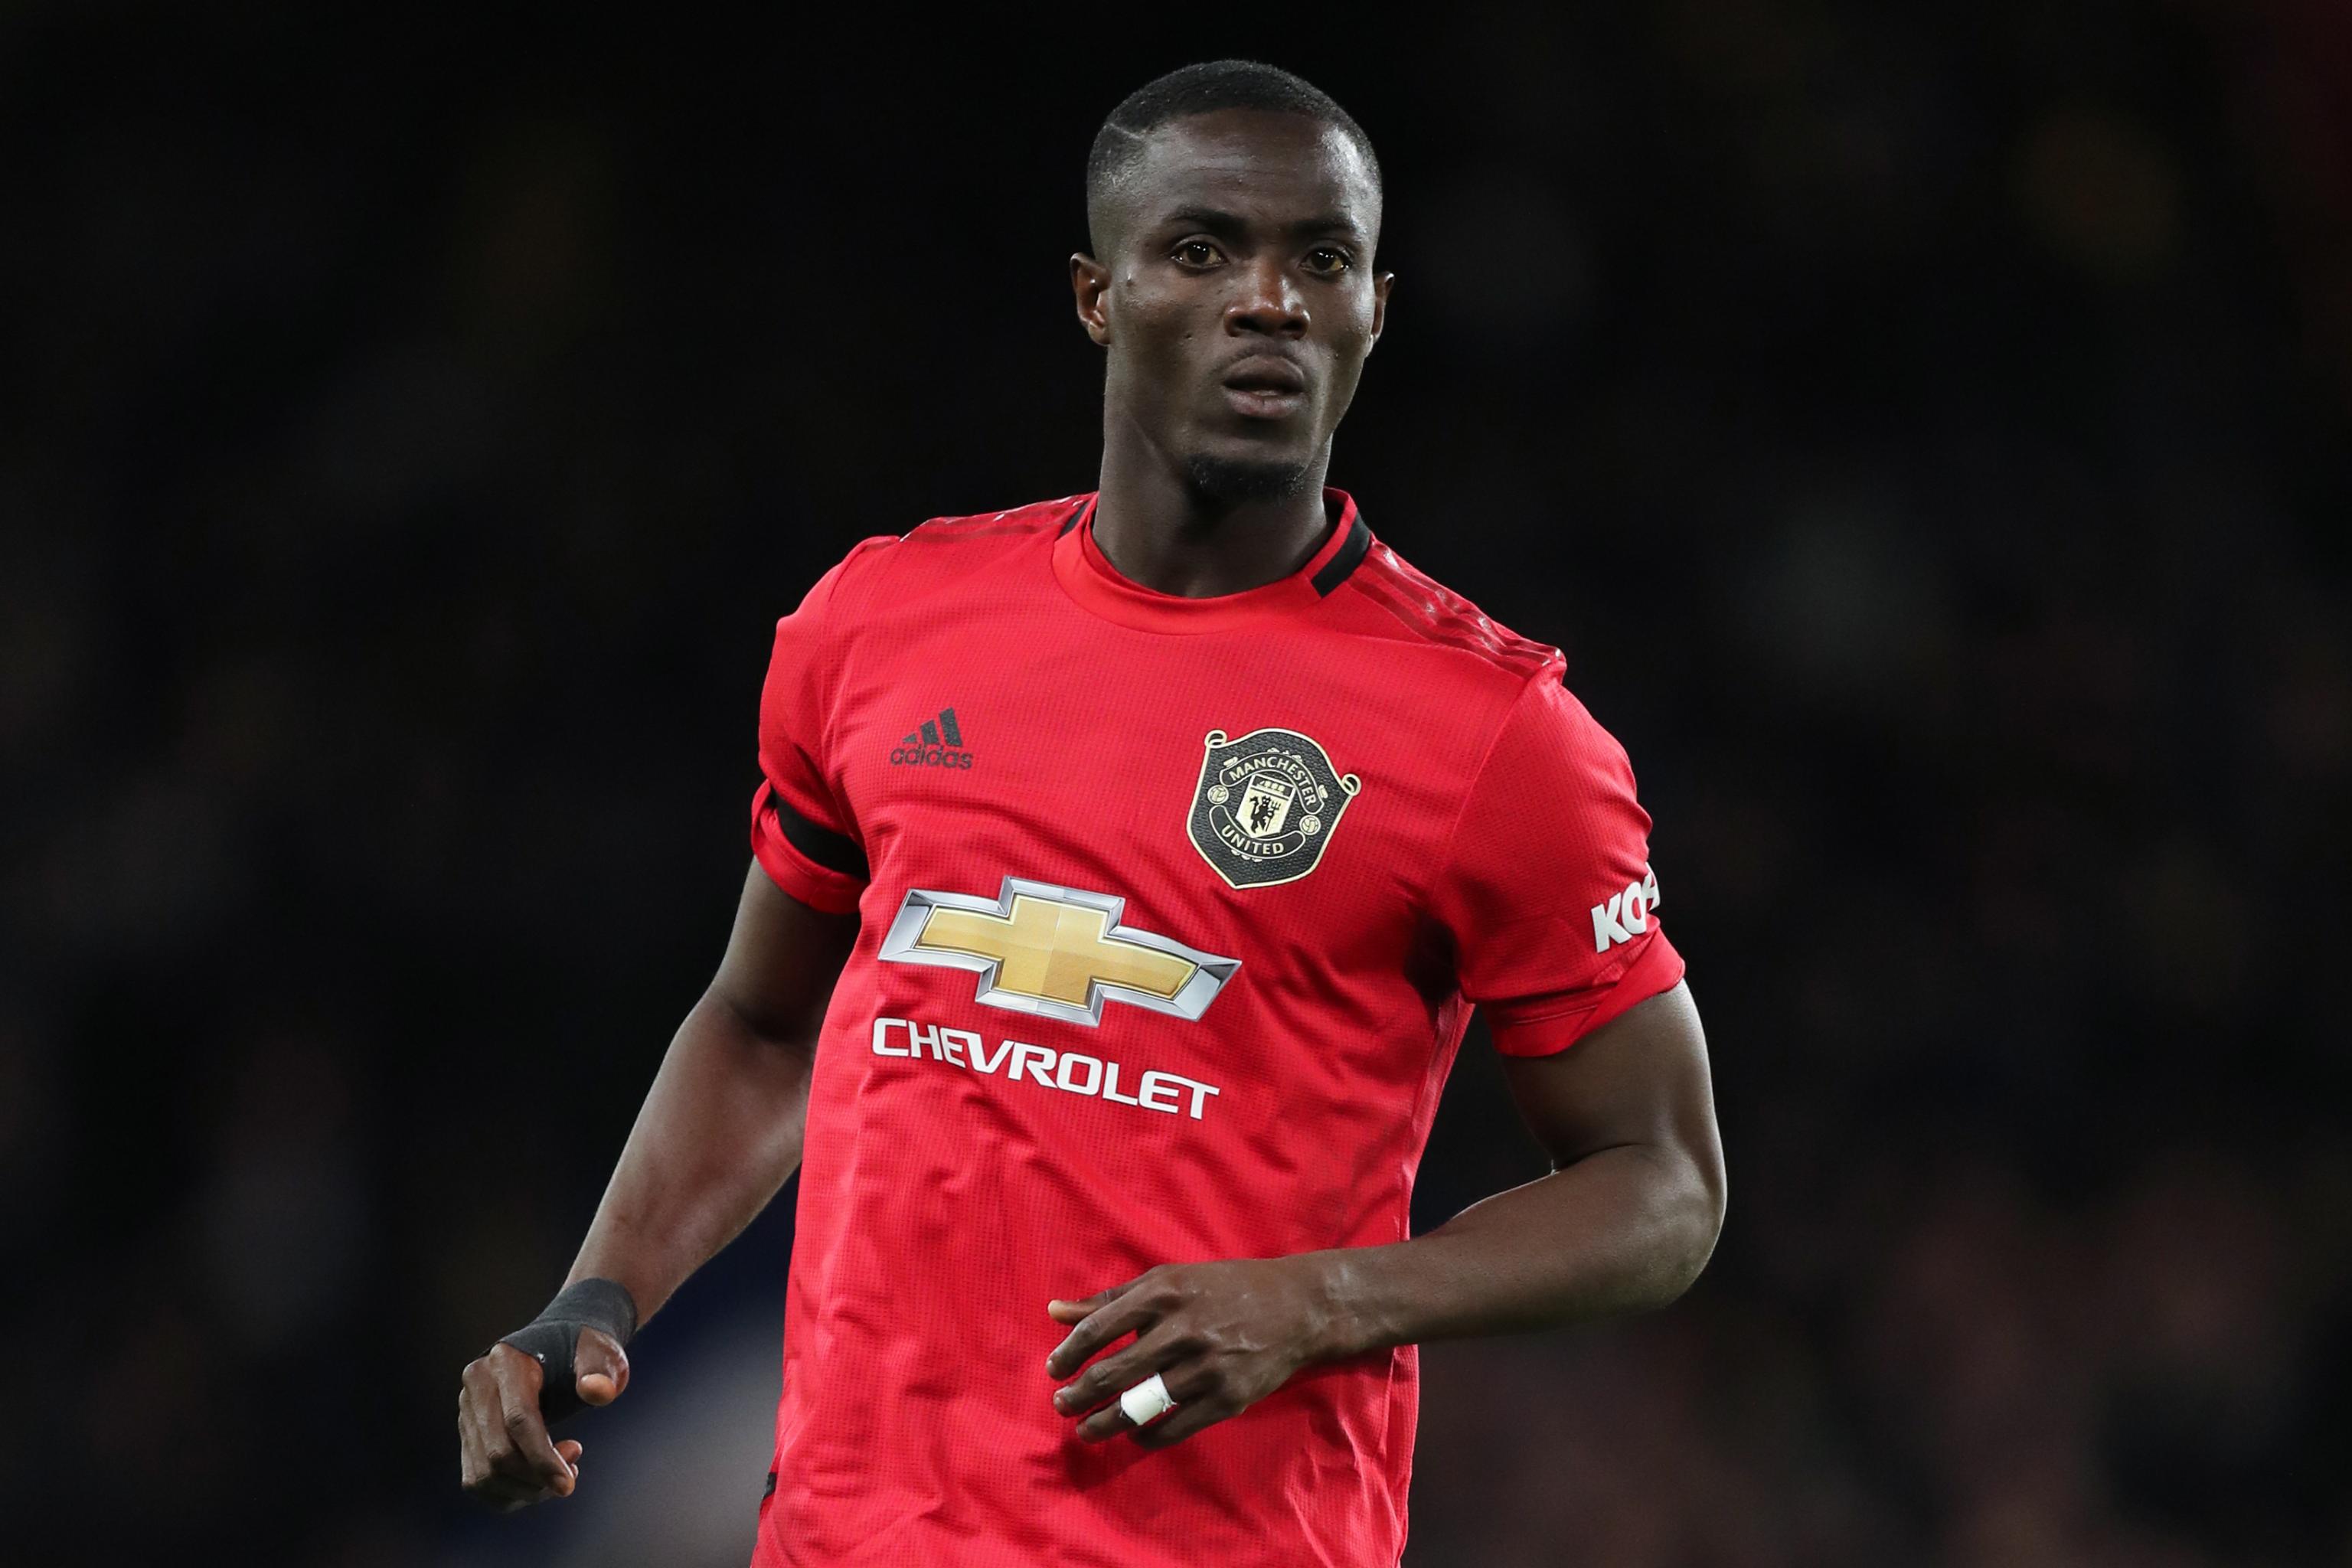 Manchester United S Eric Bailly Was Nervous In Return From Injury Vs Chelsea Bleacher Report Latest News Videos And Highlights